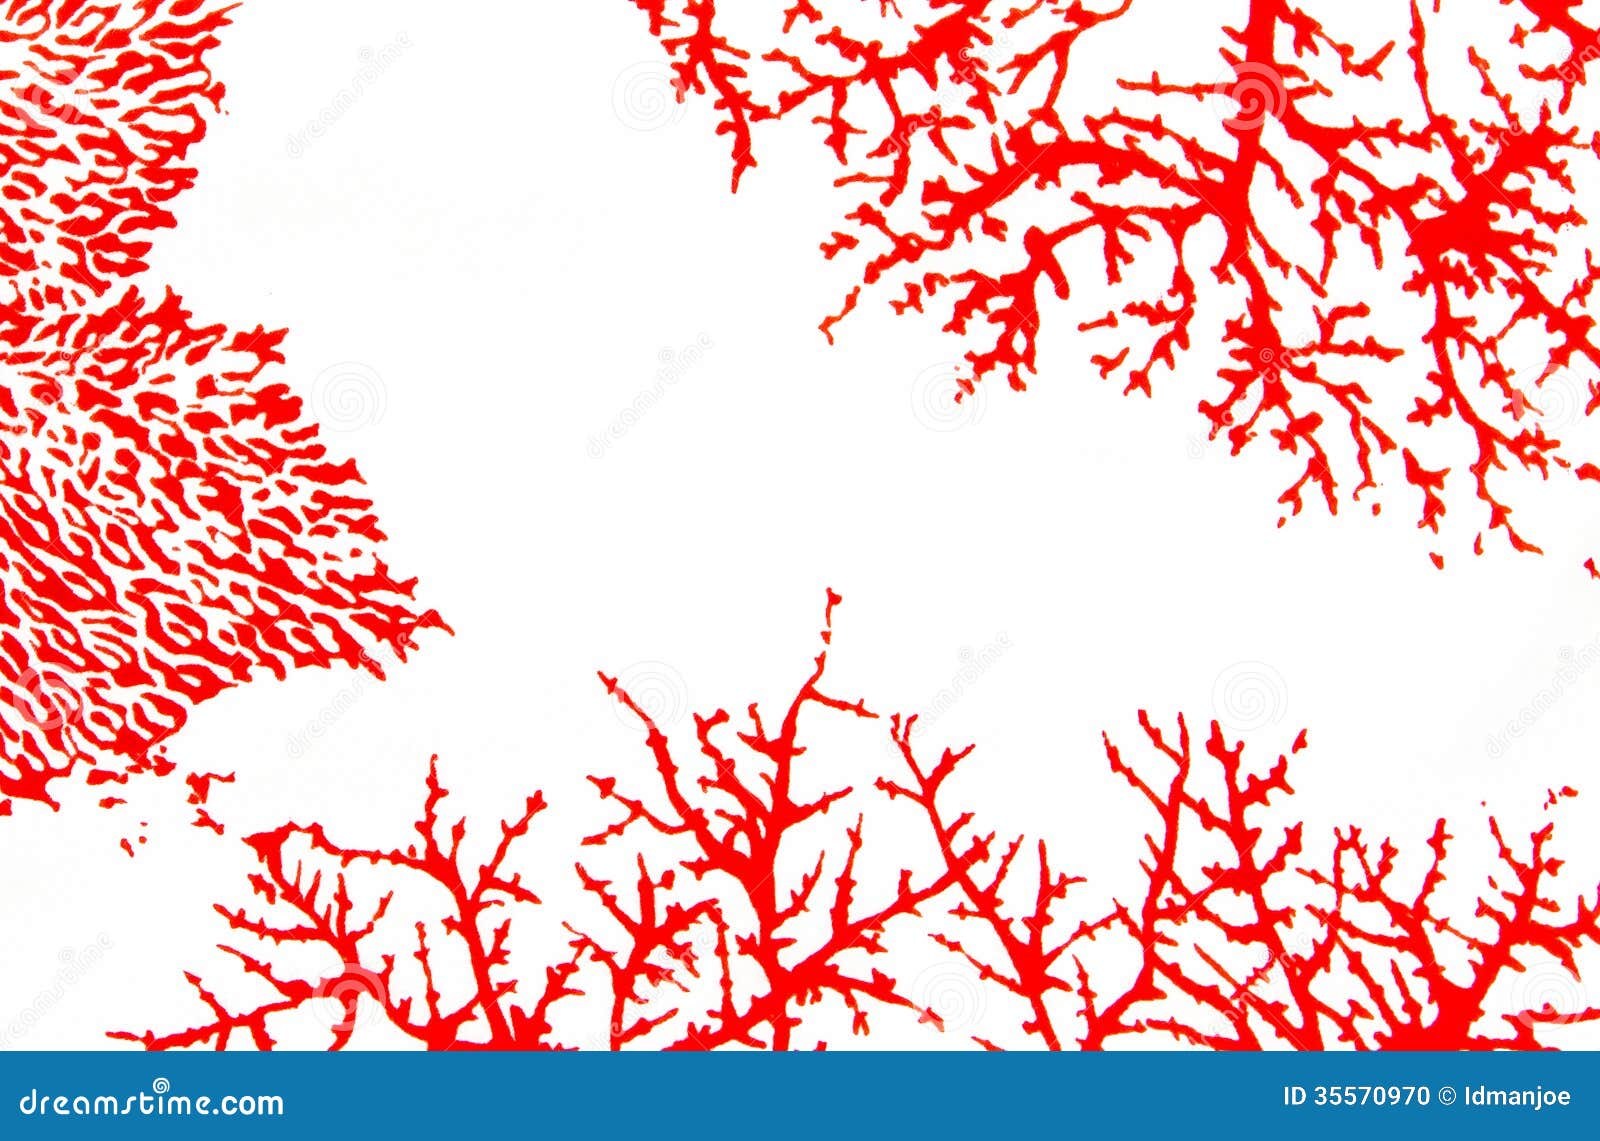 Red coral stock illustration. Illustration of alcyonacea - 35570970